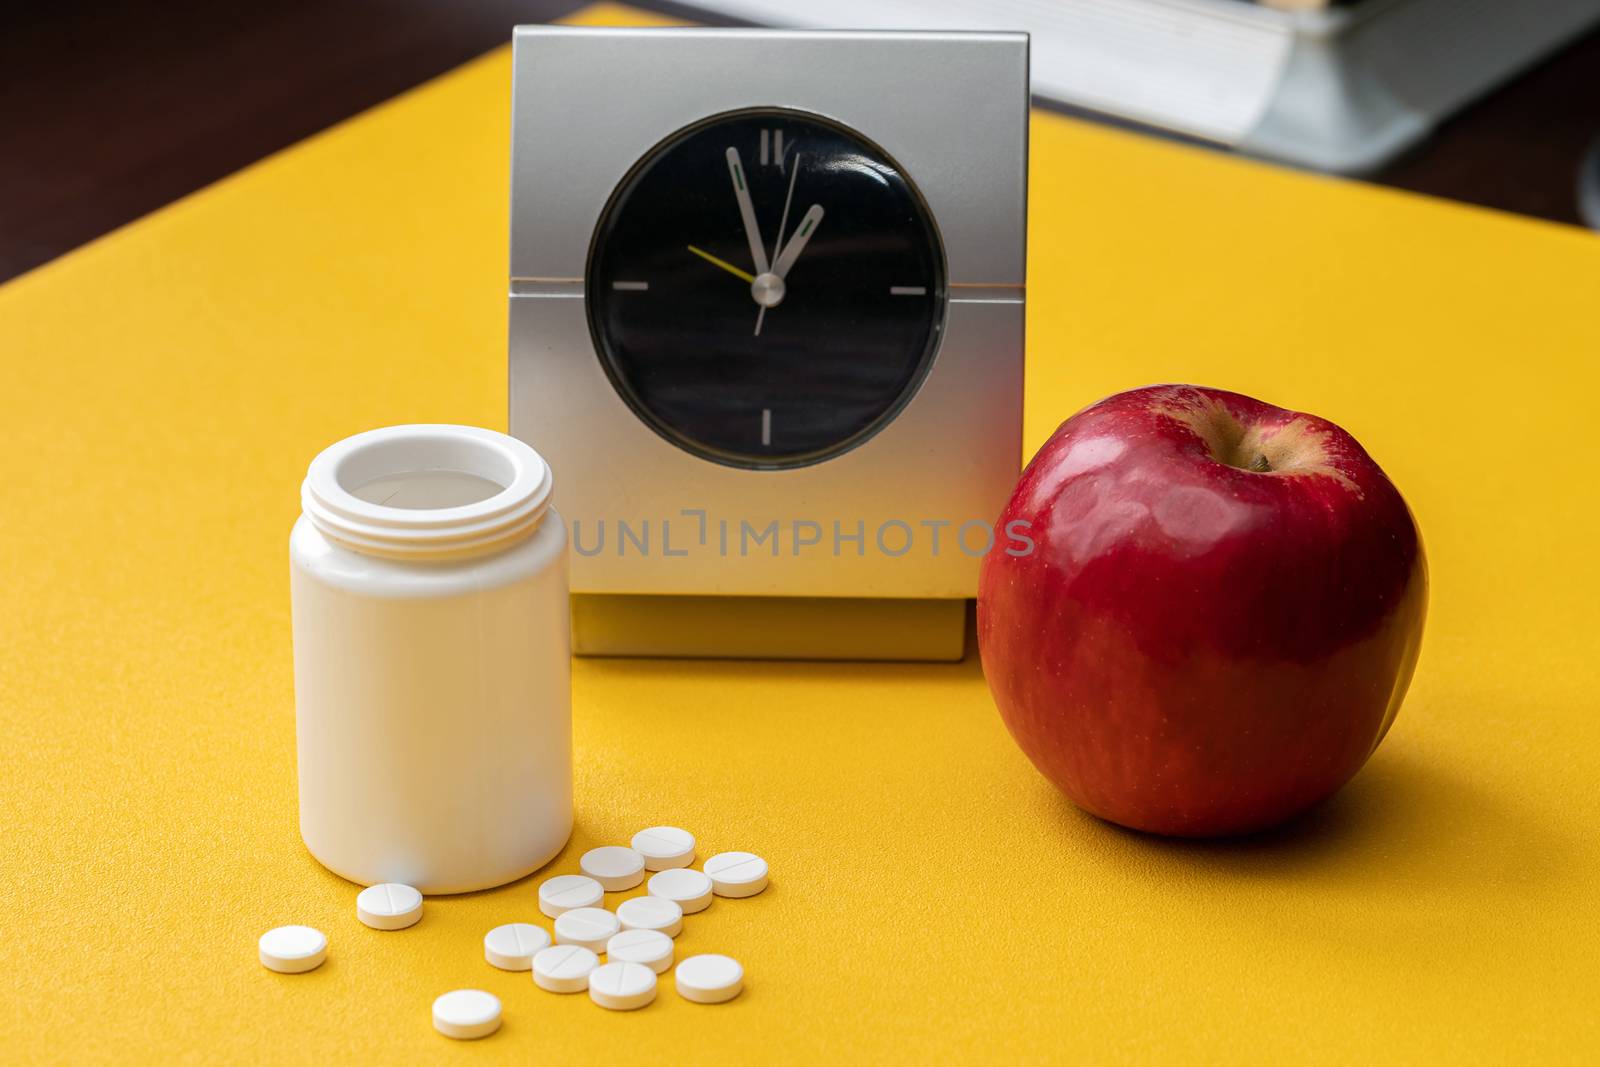 A colorful set of grey alarm clock, red Apple and pill bottles on a bright light yellow background. by bonilook